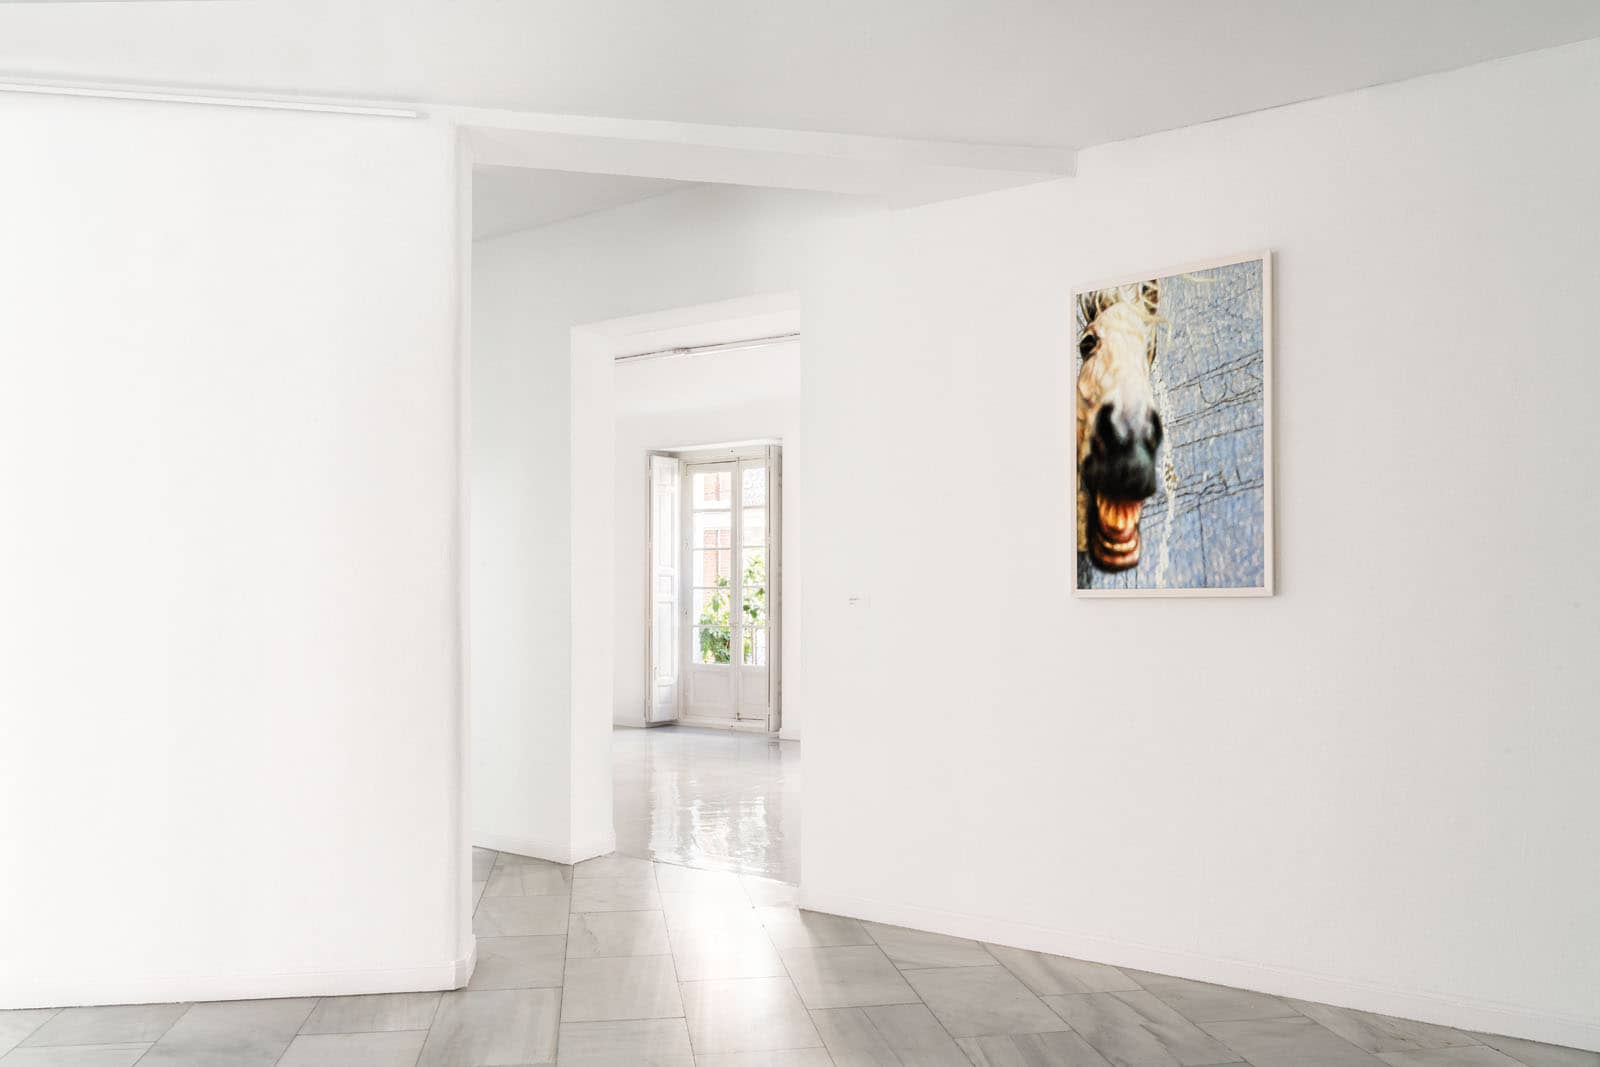 Exhibition view of the solo show "Falada" by Philipp Fröhlich at Juana de Aizpuru gallery in Spain, 2022. The image shows a single oil painting based on "die Gänsemagd" by the brothers Grimm, at the entrance of the gallery in Madrid.